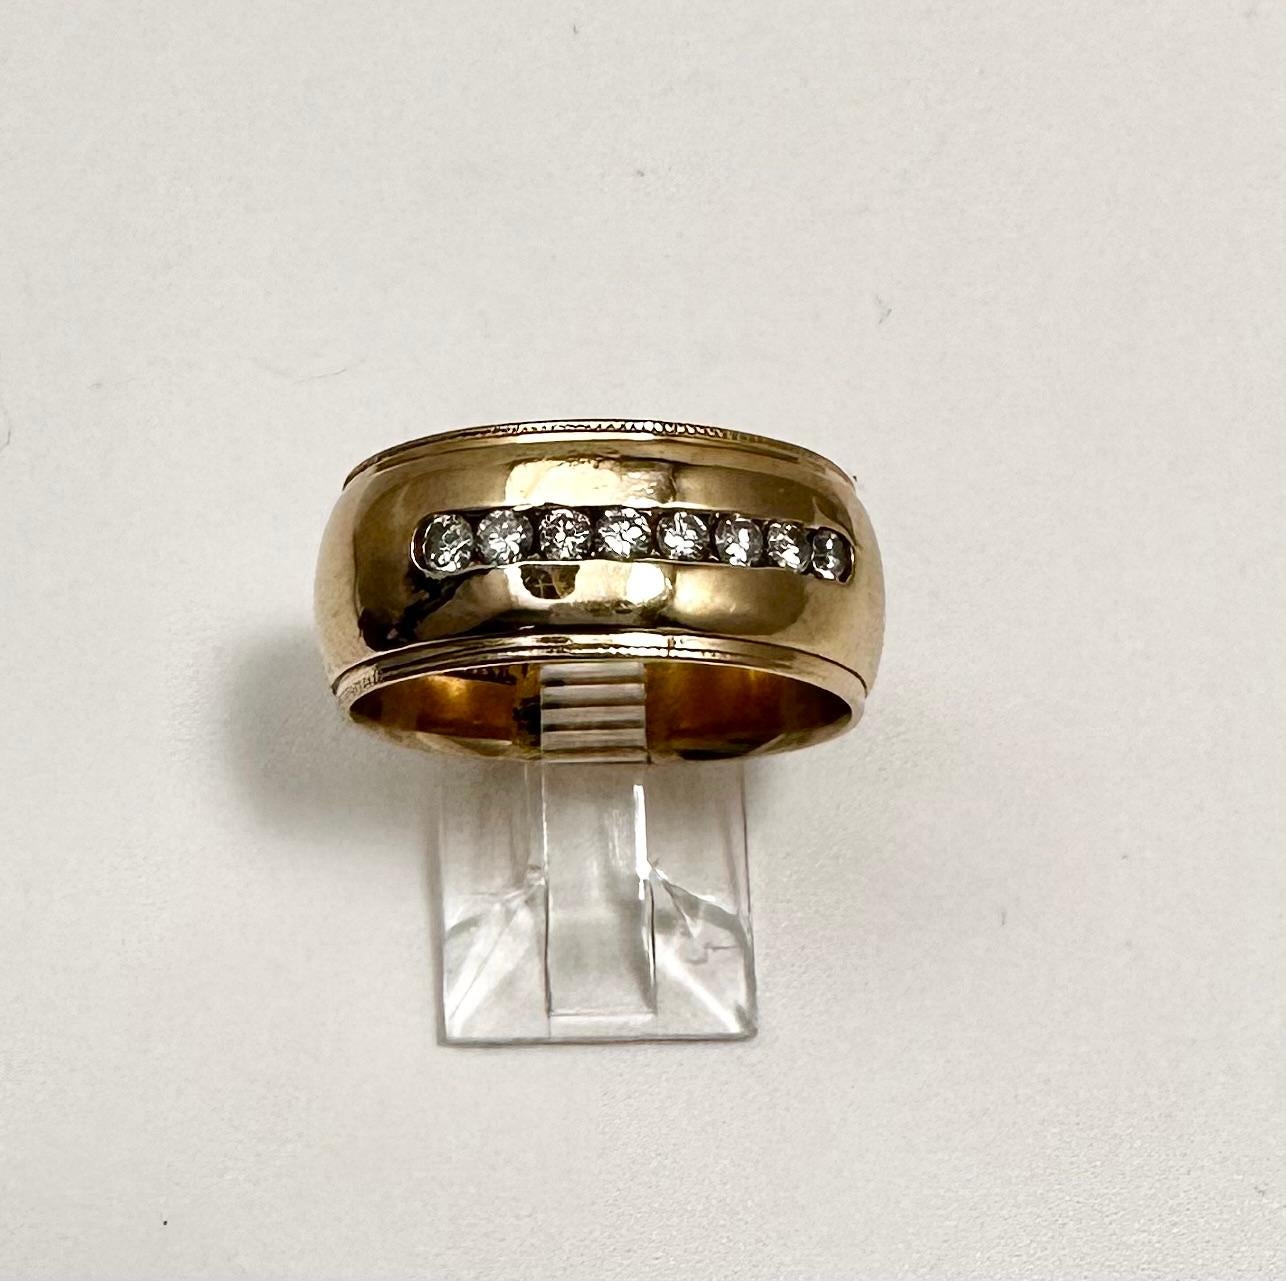 ring size 9.5 in mm